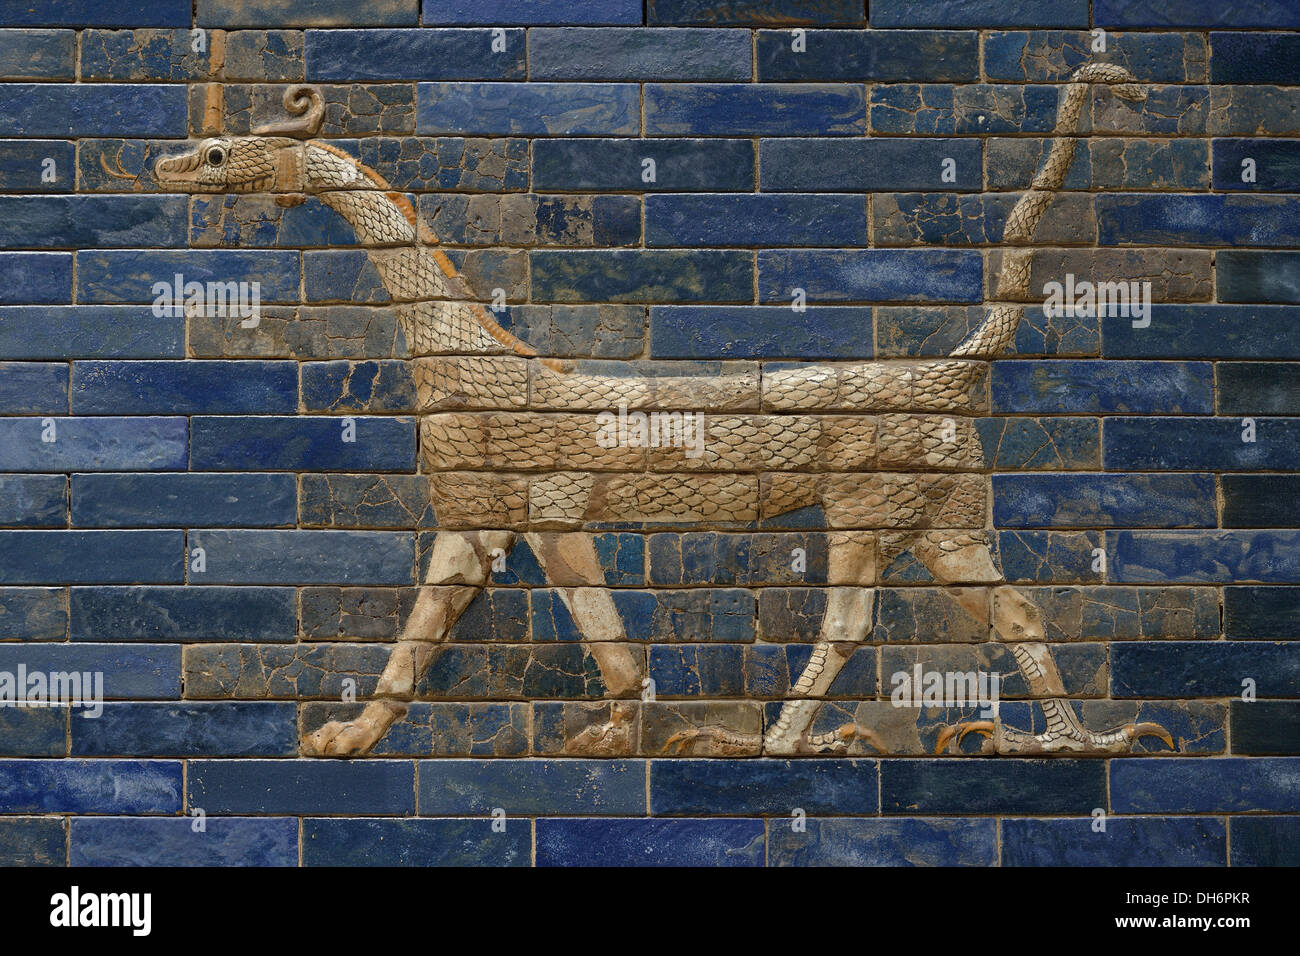 Berlin. Germany. Pergamon Museum, image of a dragon on the Ishtar Gate. Stock Photo